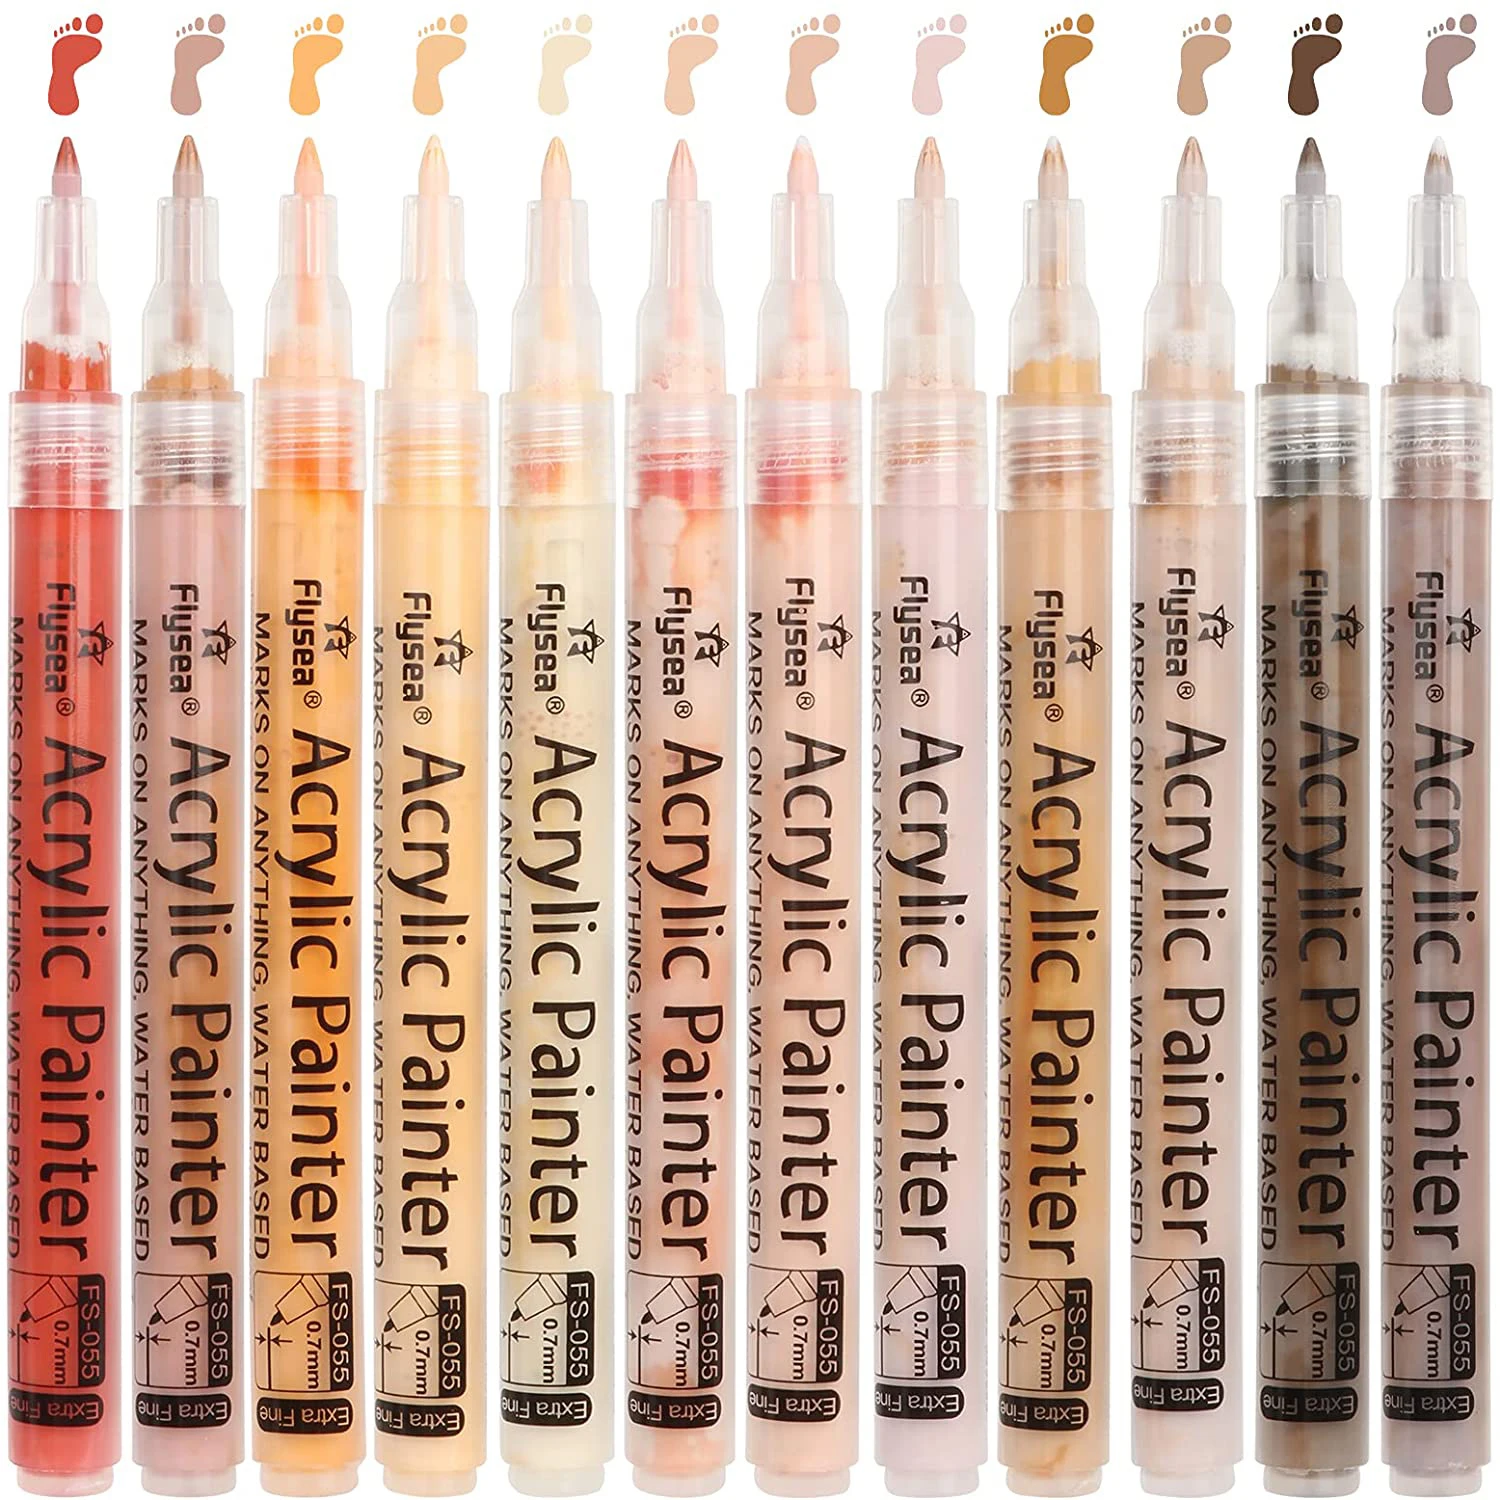 

12 Colors Skin Tones Art Markers 0.7mm Extra Fine Tip Acrylic Paint Pens Sketch Portrait Manga Drawing Illustration Sketching